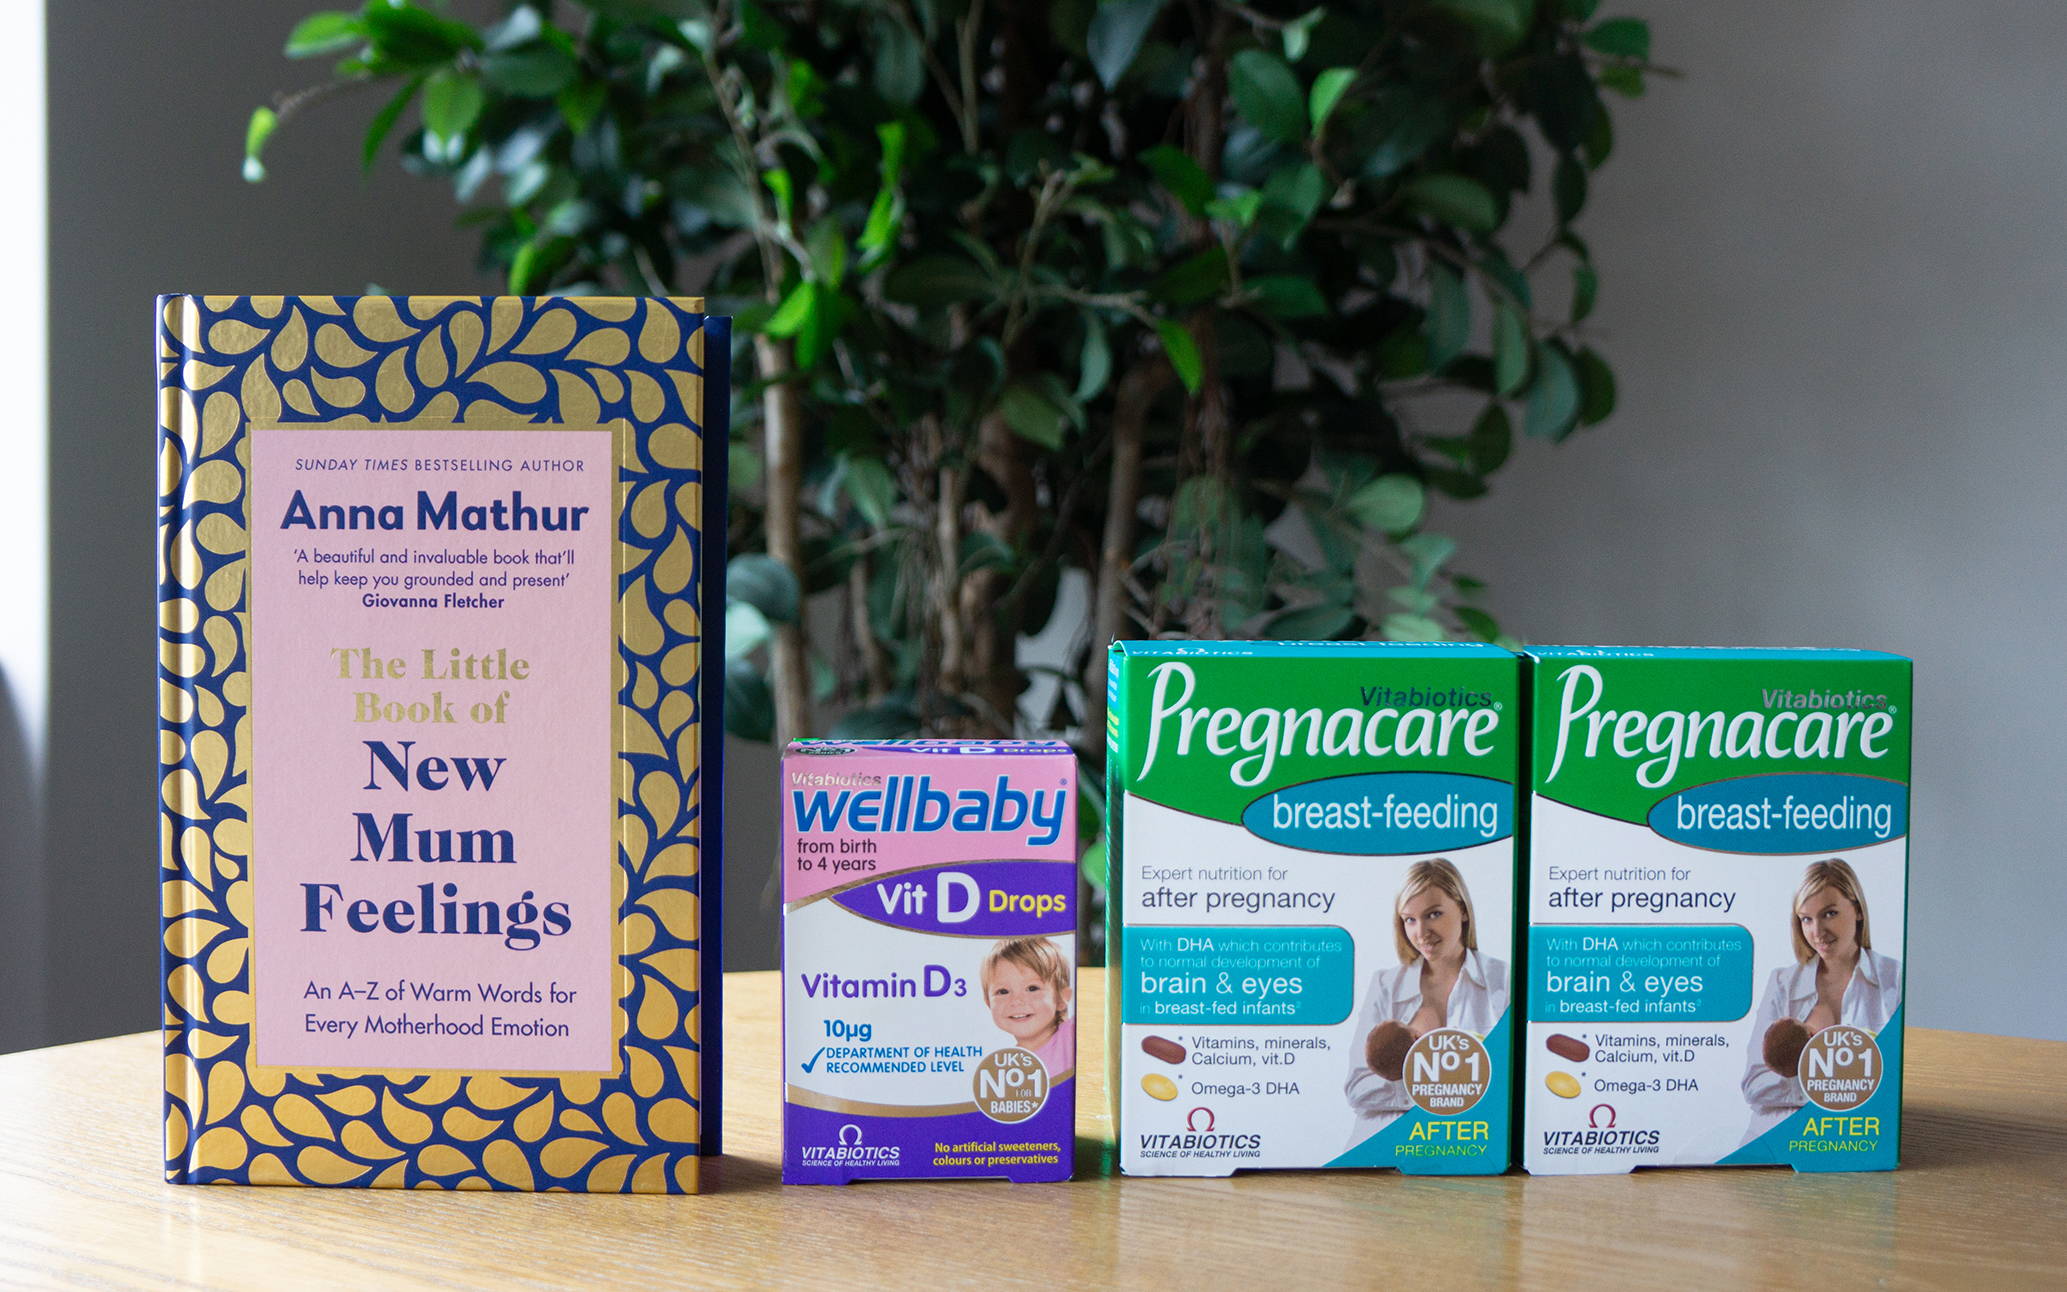 GIVEAWAY Enter Our Pregnacare Breast-feeding Giveaway For New Mums